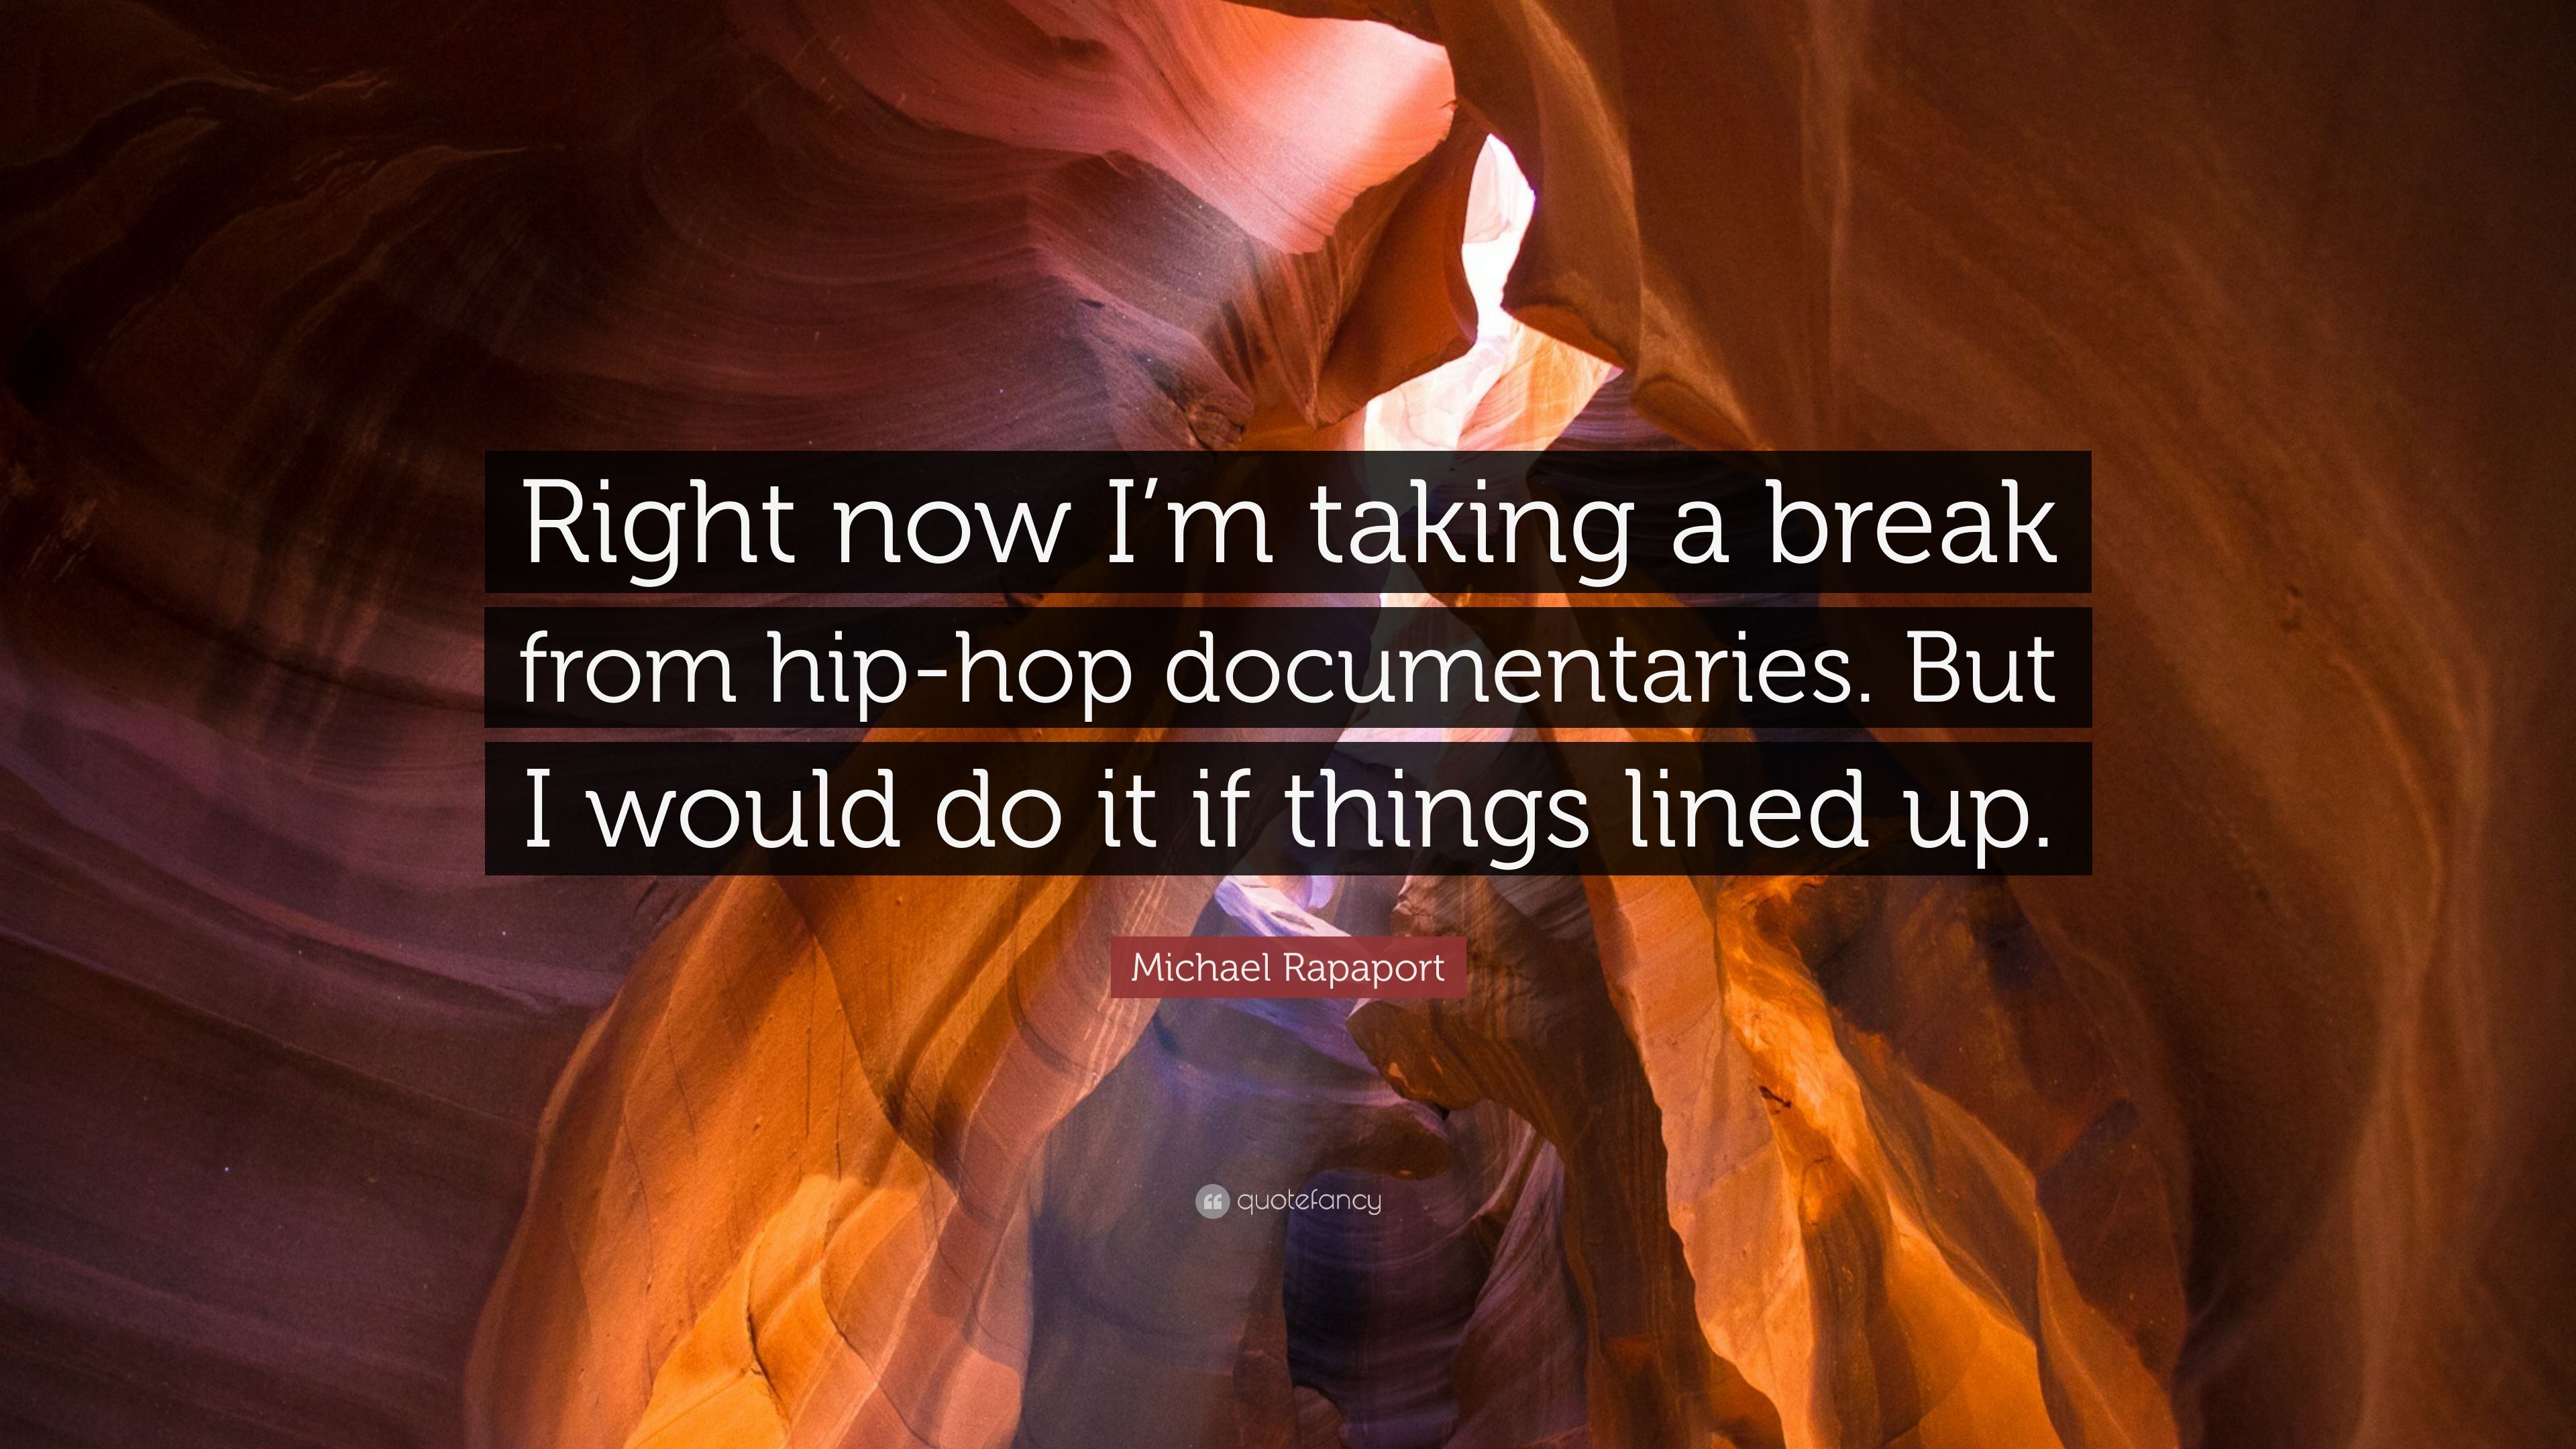 Michael Rapaport Quote: “Right Now I'm Taking A Break From Hip Hop Documentaries. But I Would Do It If Things Lined Up.” (7 Wallpaper)